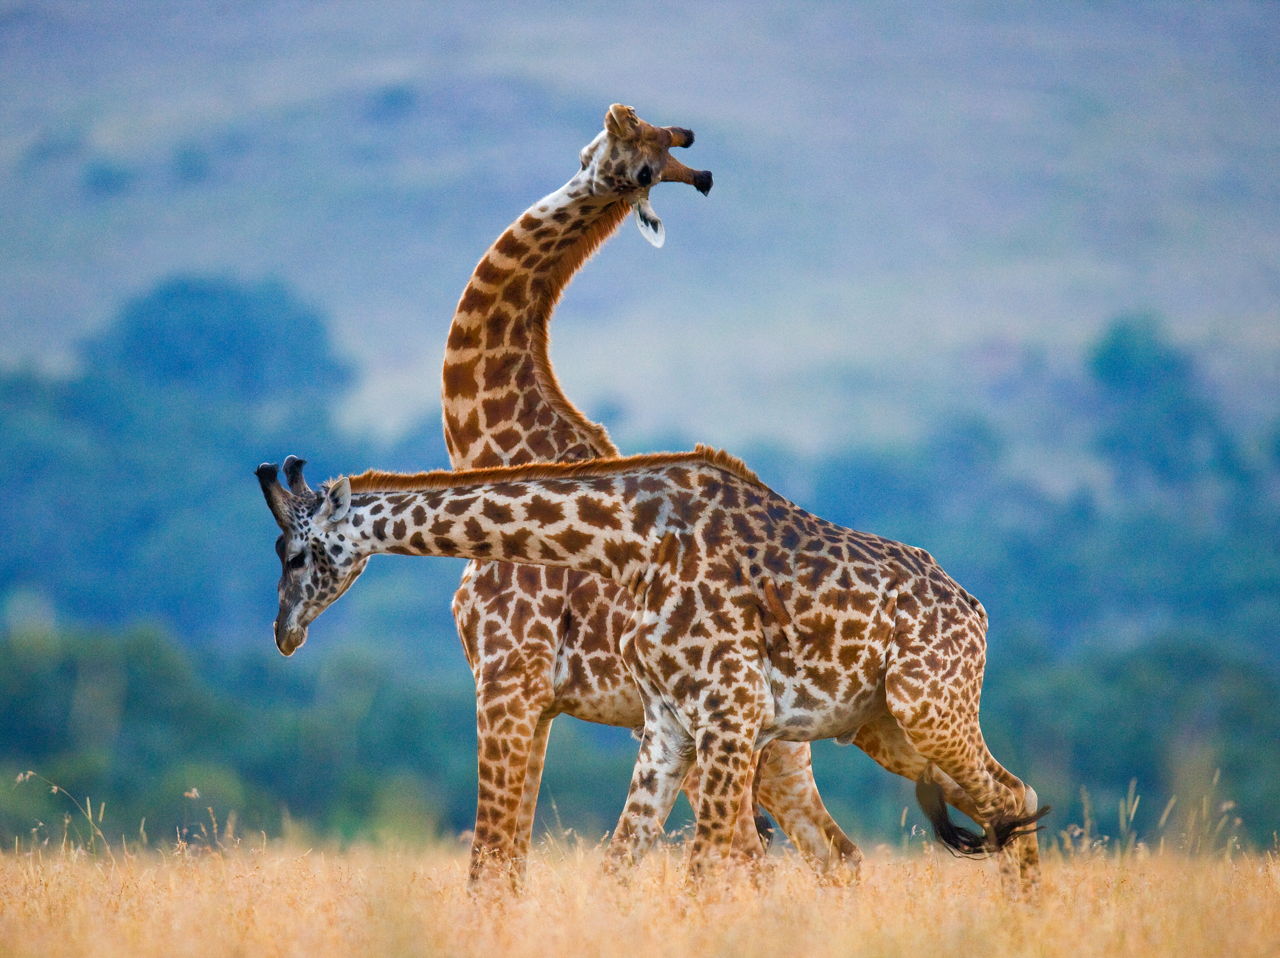 Unfortunately, Only About 20% Of People Can Ace This General Knowledge Quiz — Let’s Hope You’re One of the Smart Ones Giraffe